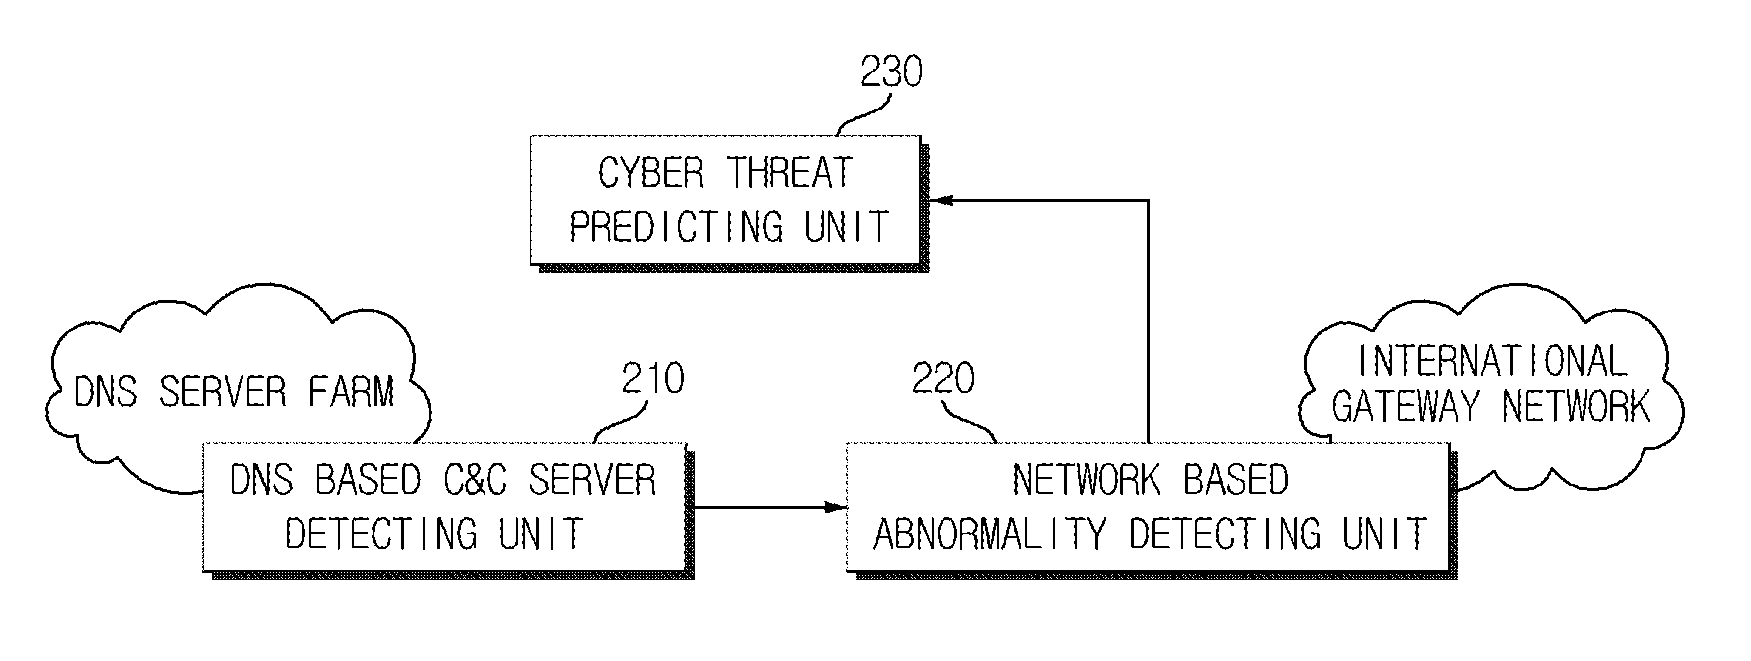 Cyber threat prior prediction apparatus and method